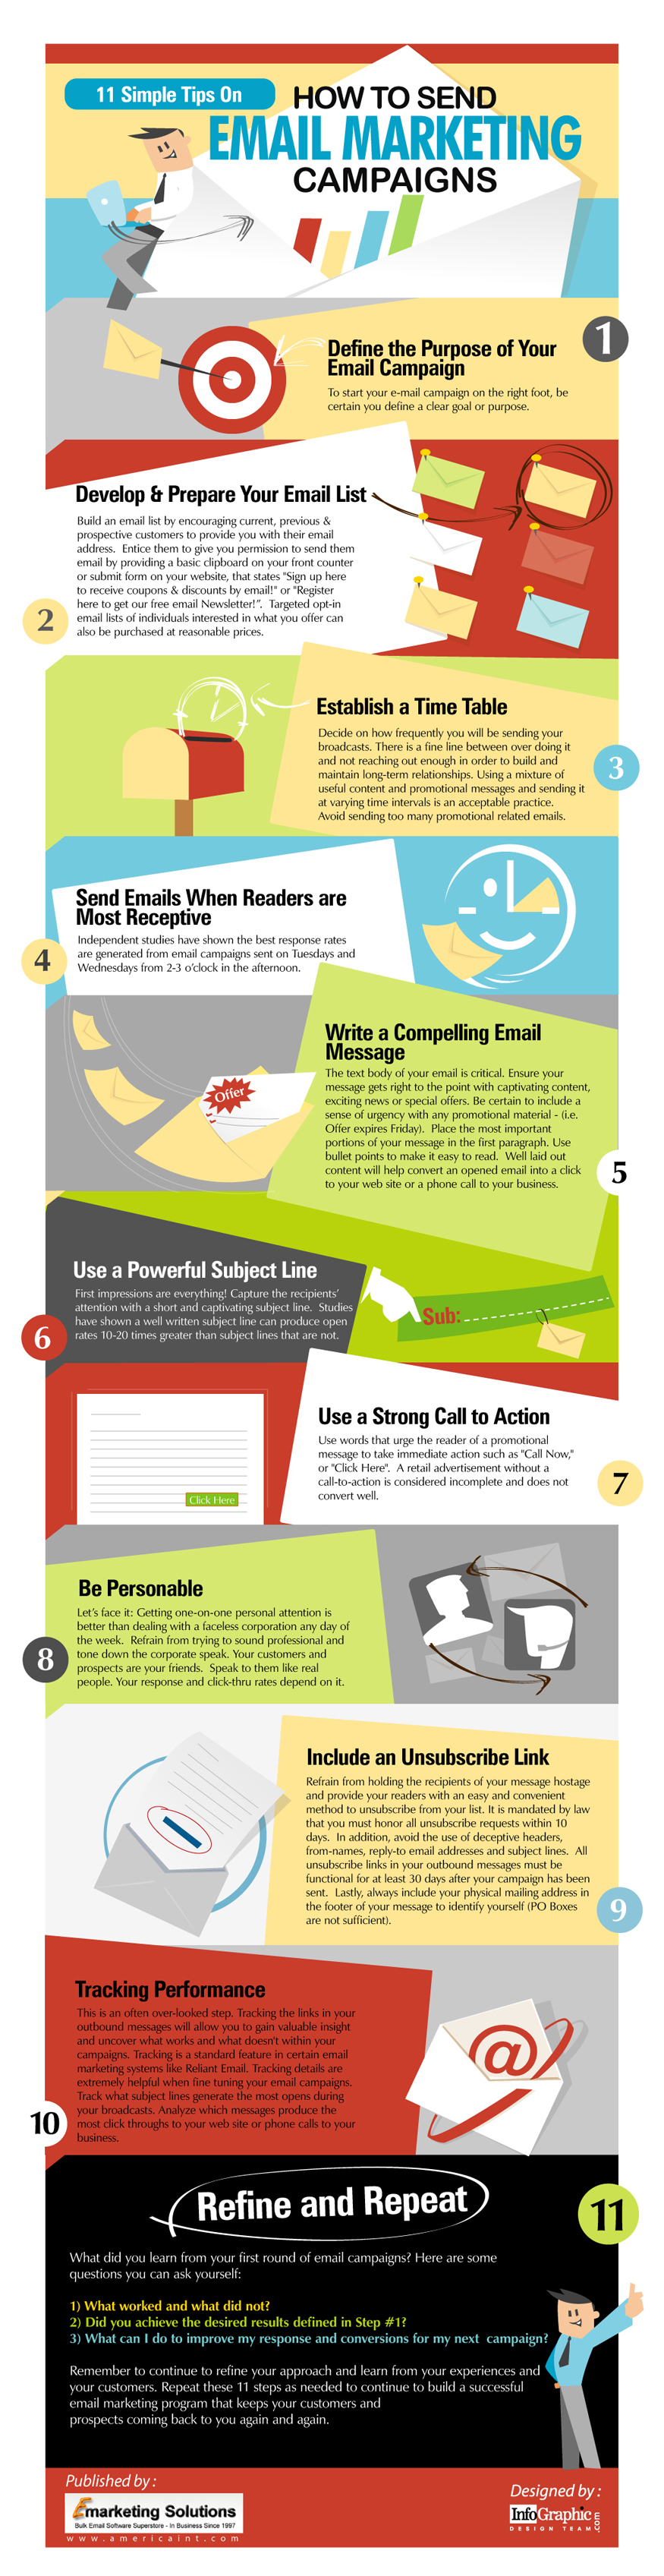 How To Send Email Marketing Campaigns